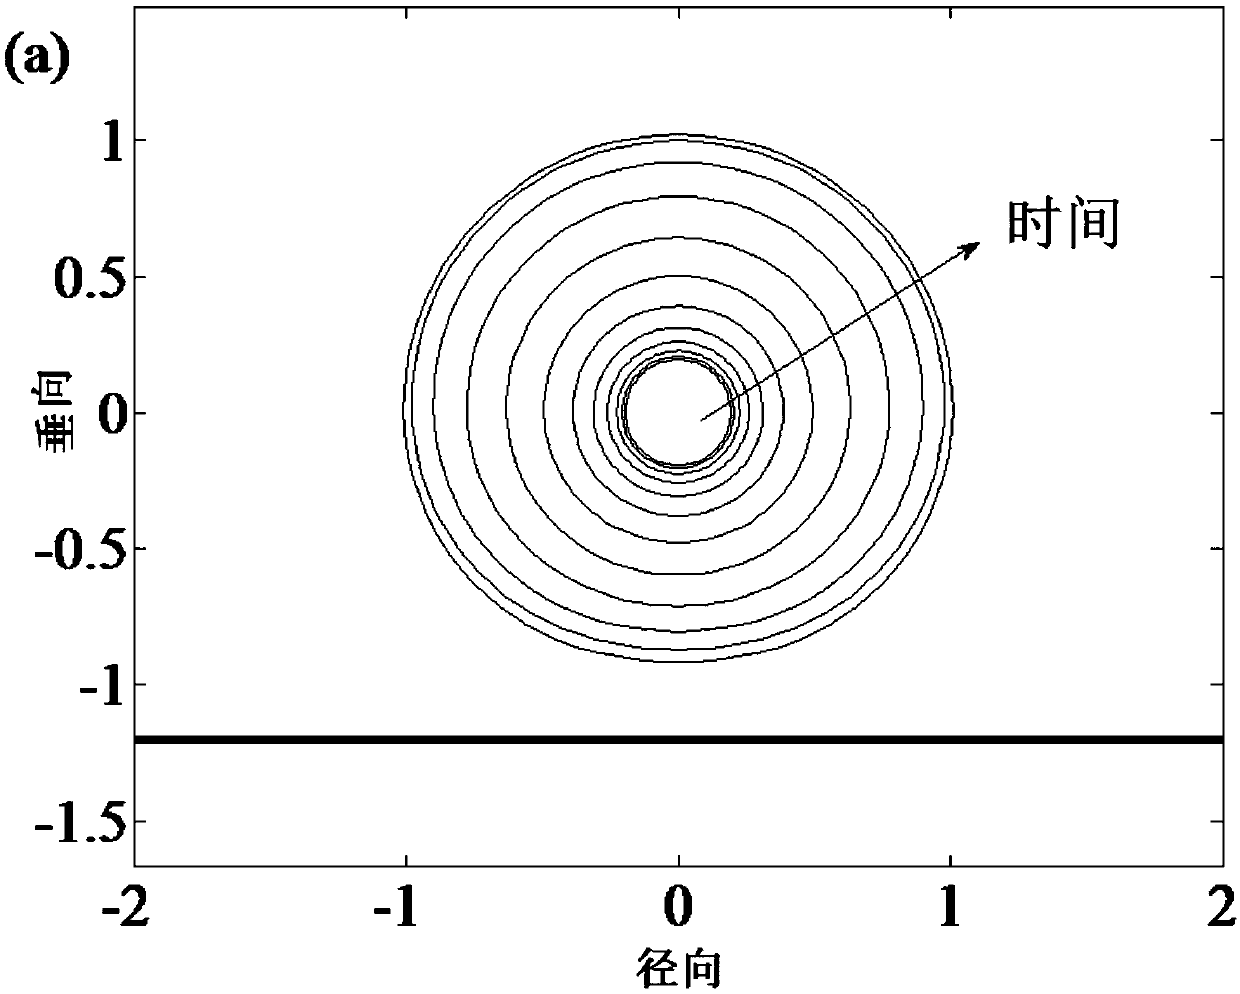 Experimental and numerical combined method for high pressure pulsating bubble motion and load in water